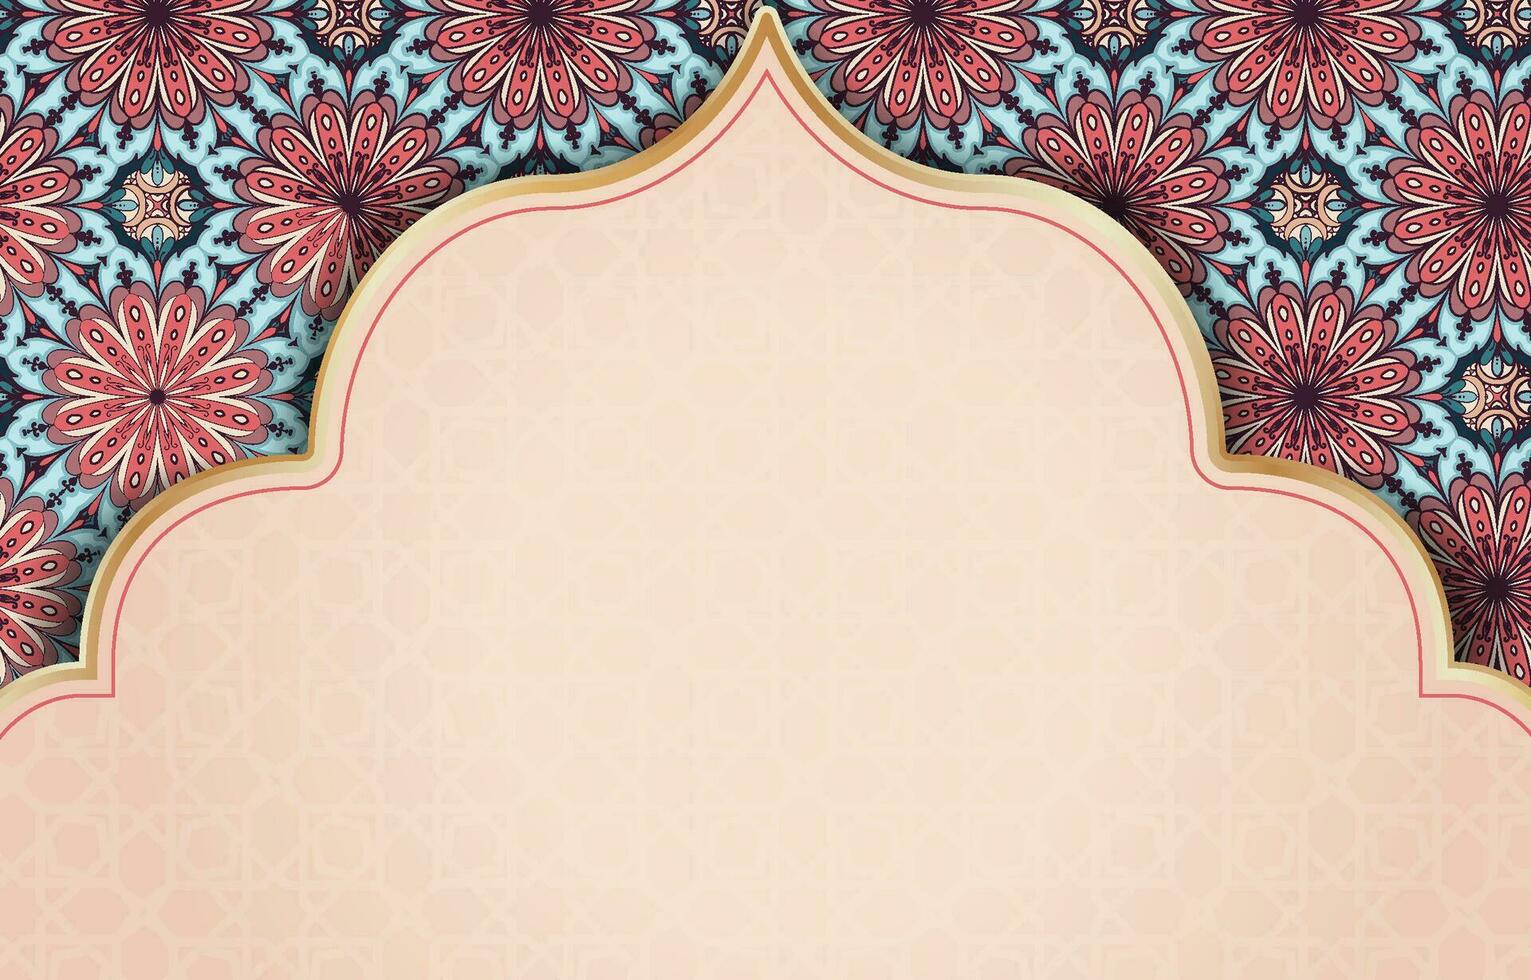 Colorful Islamic Vintage Floral Background vector